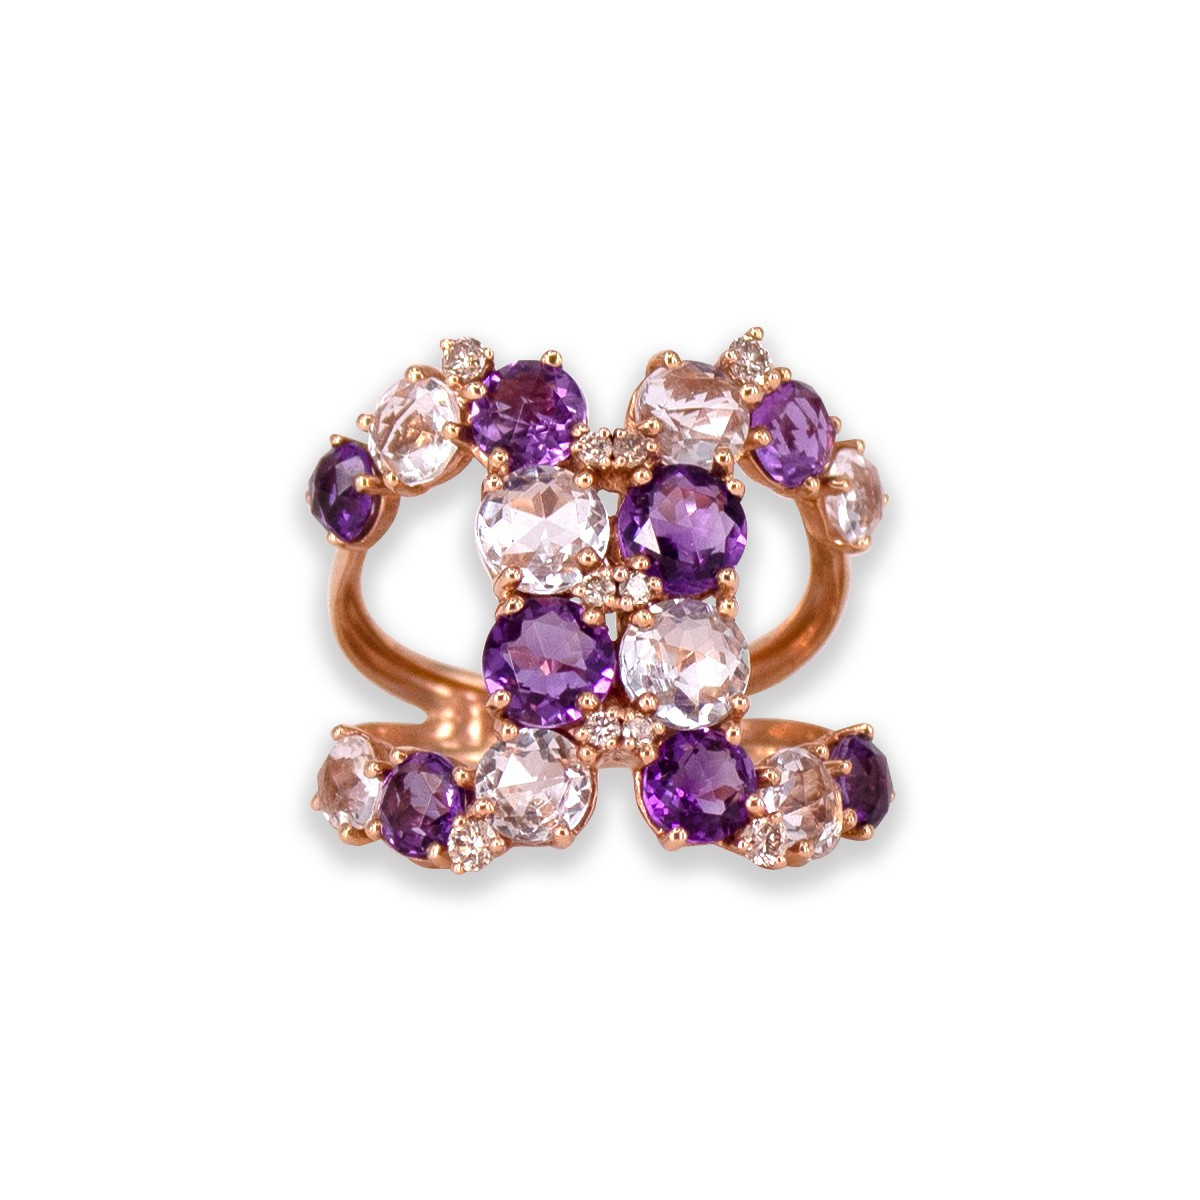 ROSE GOLD RING WITH DIAMONDS, AMETHYSTS AND WHITE TOPAZ